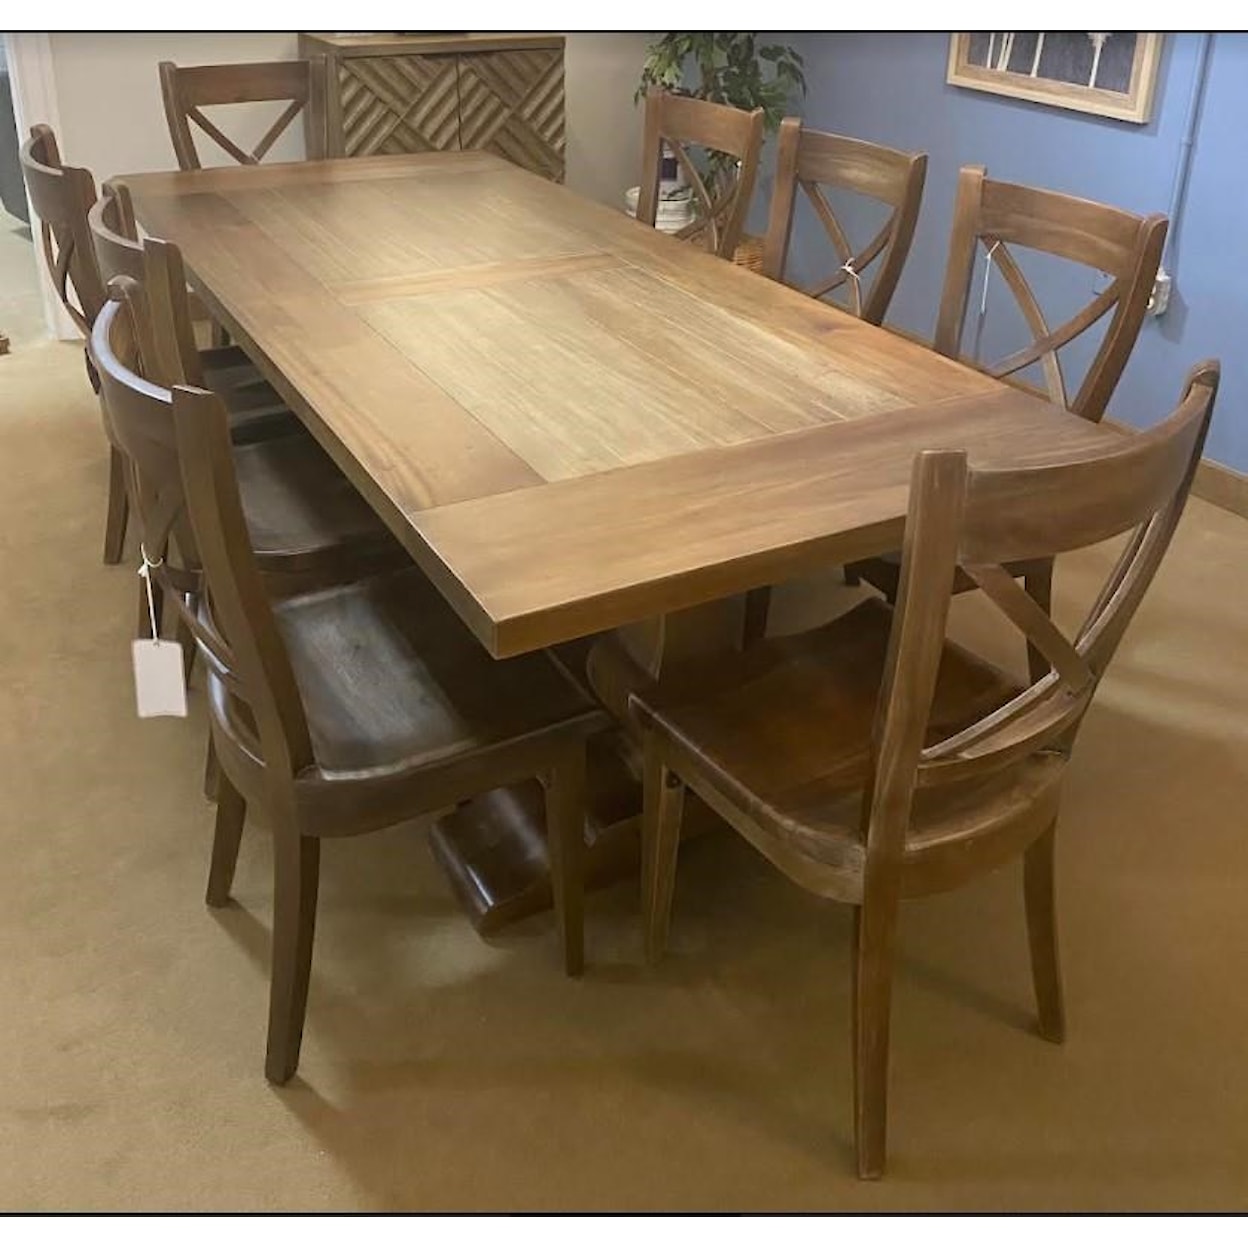 Bramble Charleston Trestle Dining Table and 8 Chairs